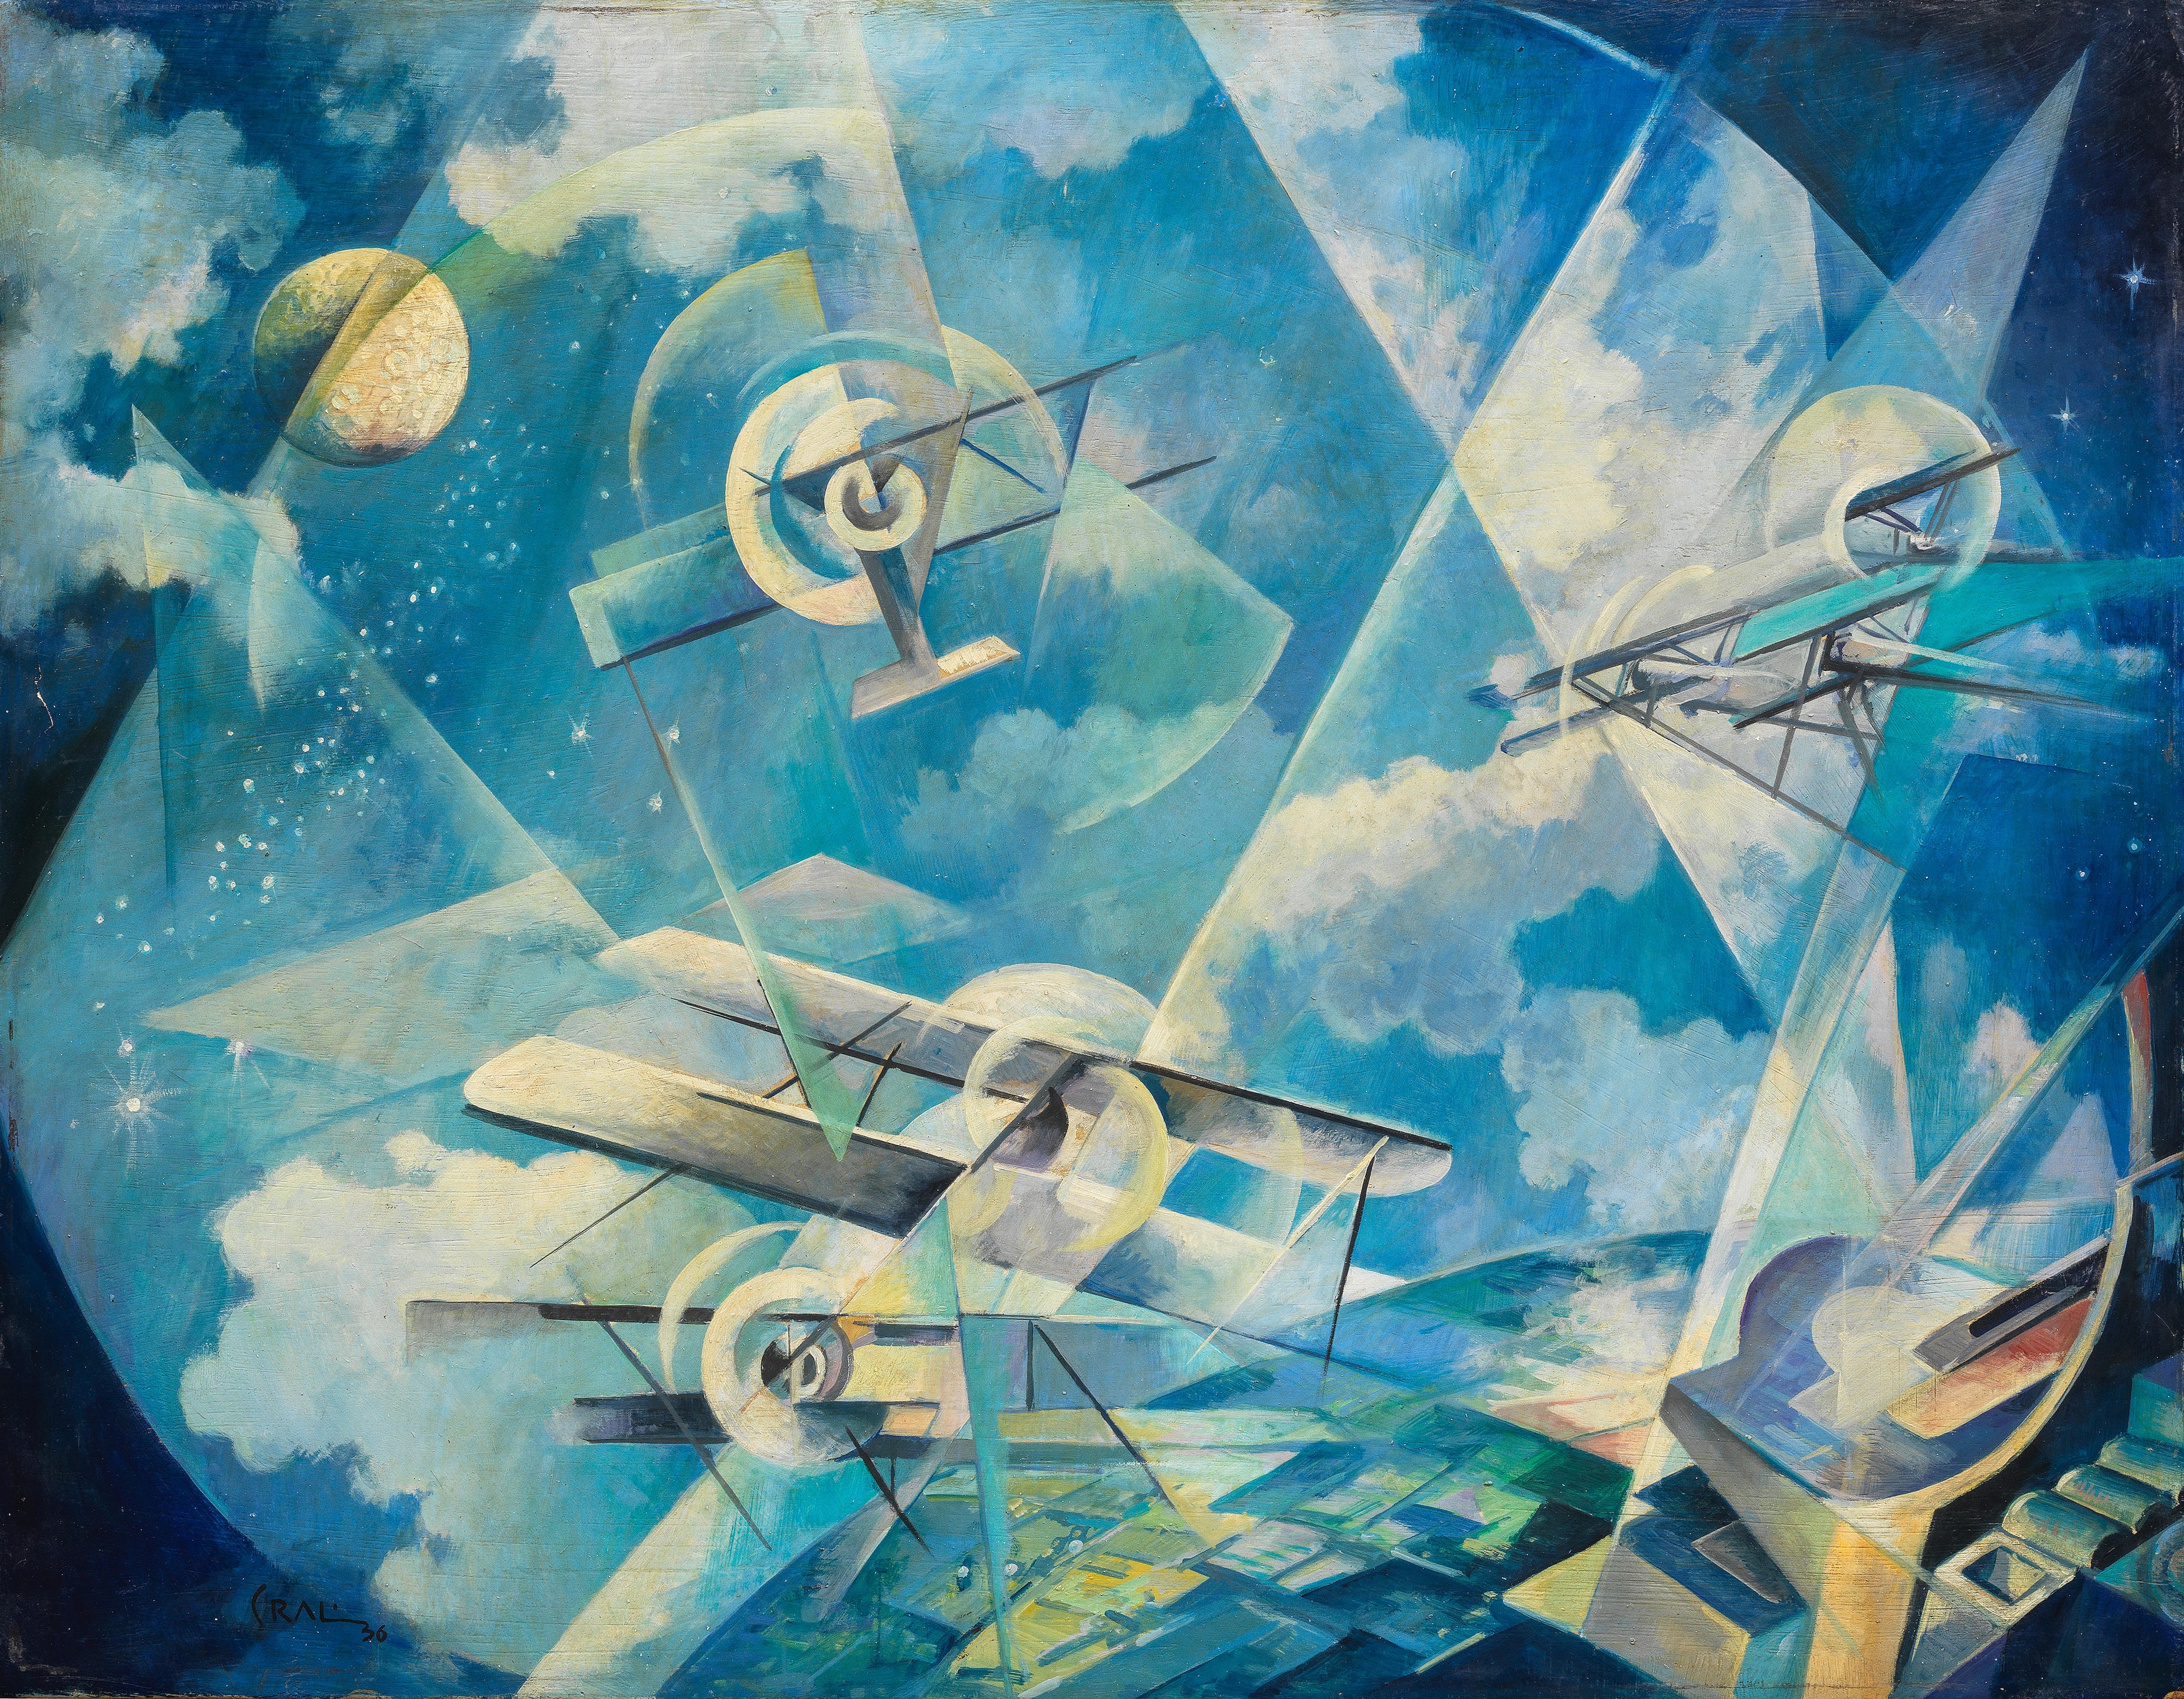 Inseguendo le stelle by Tullio Crali, Painted in 1936